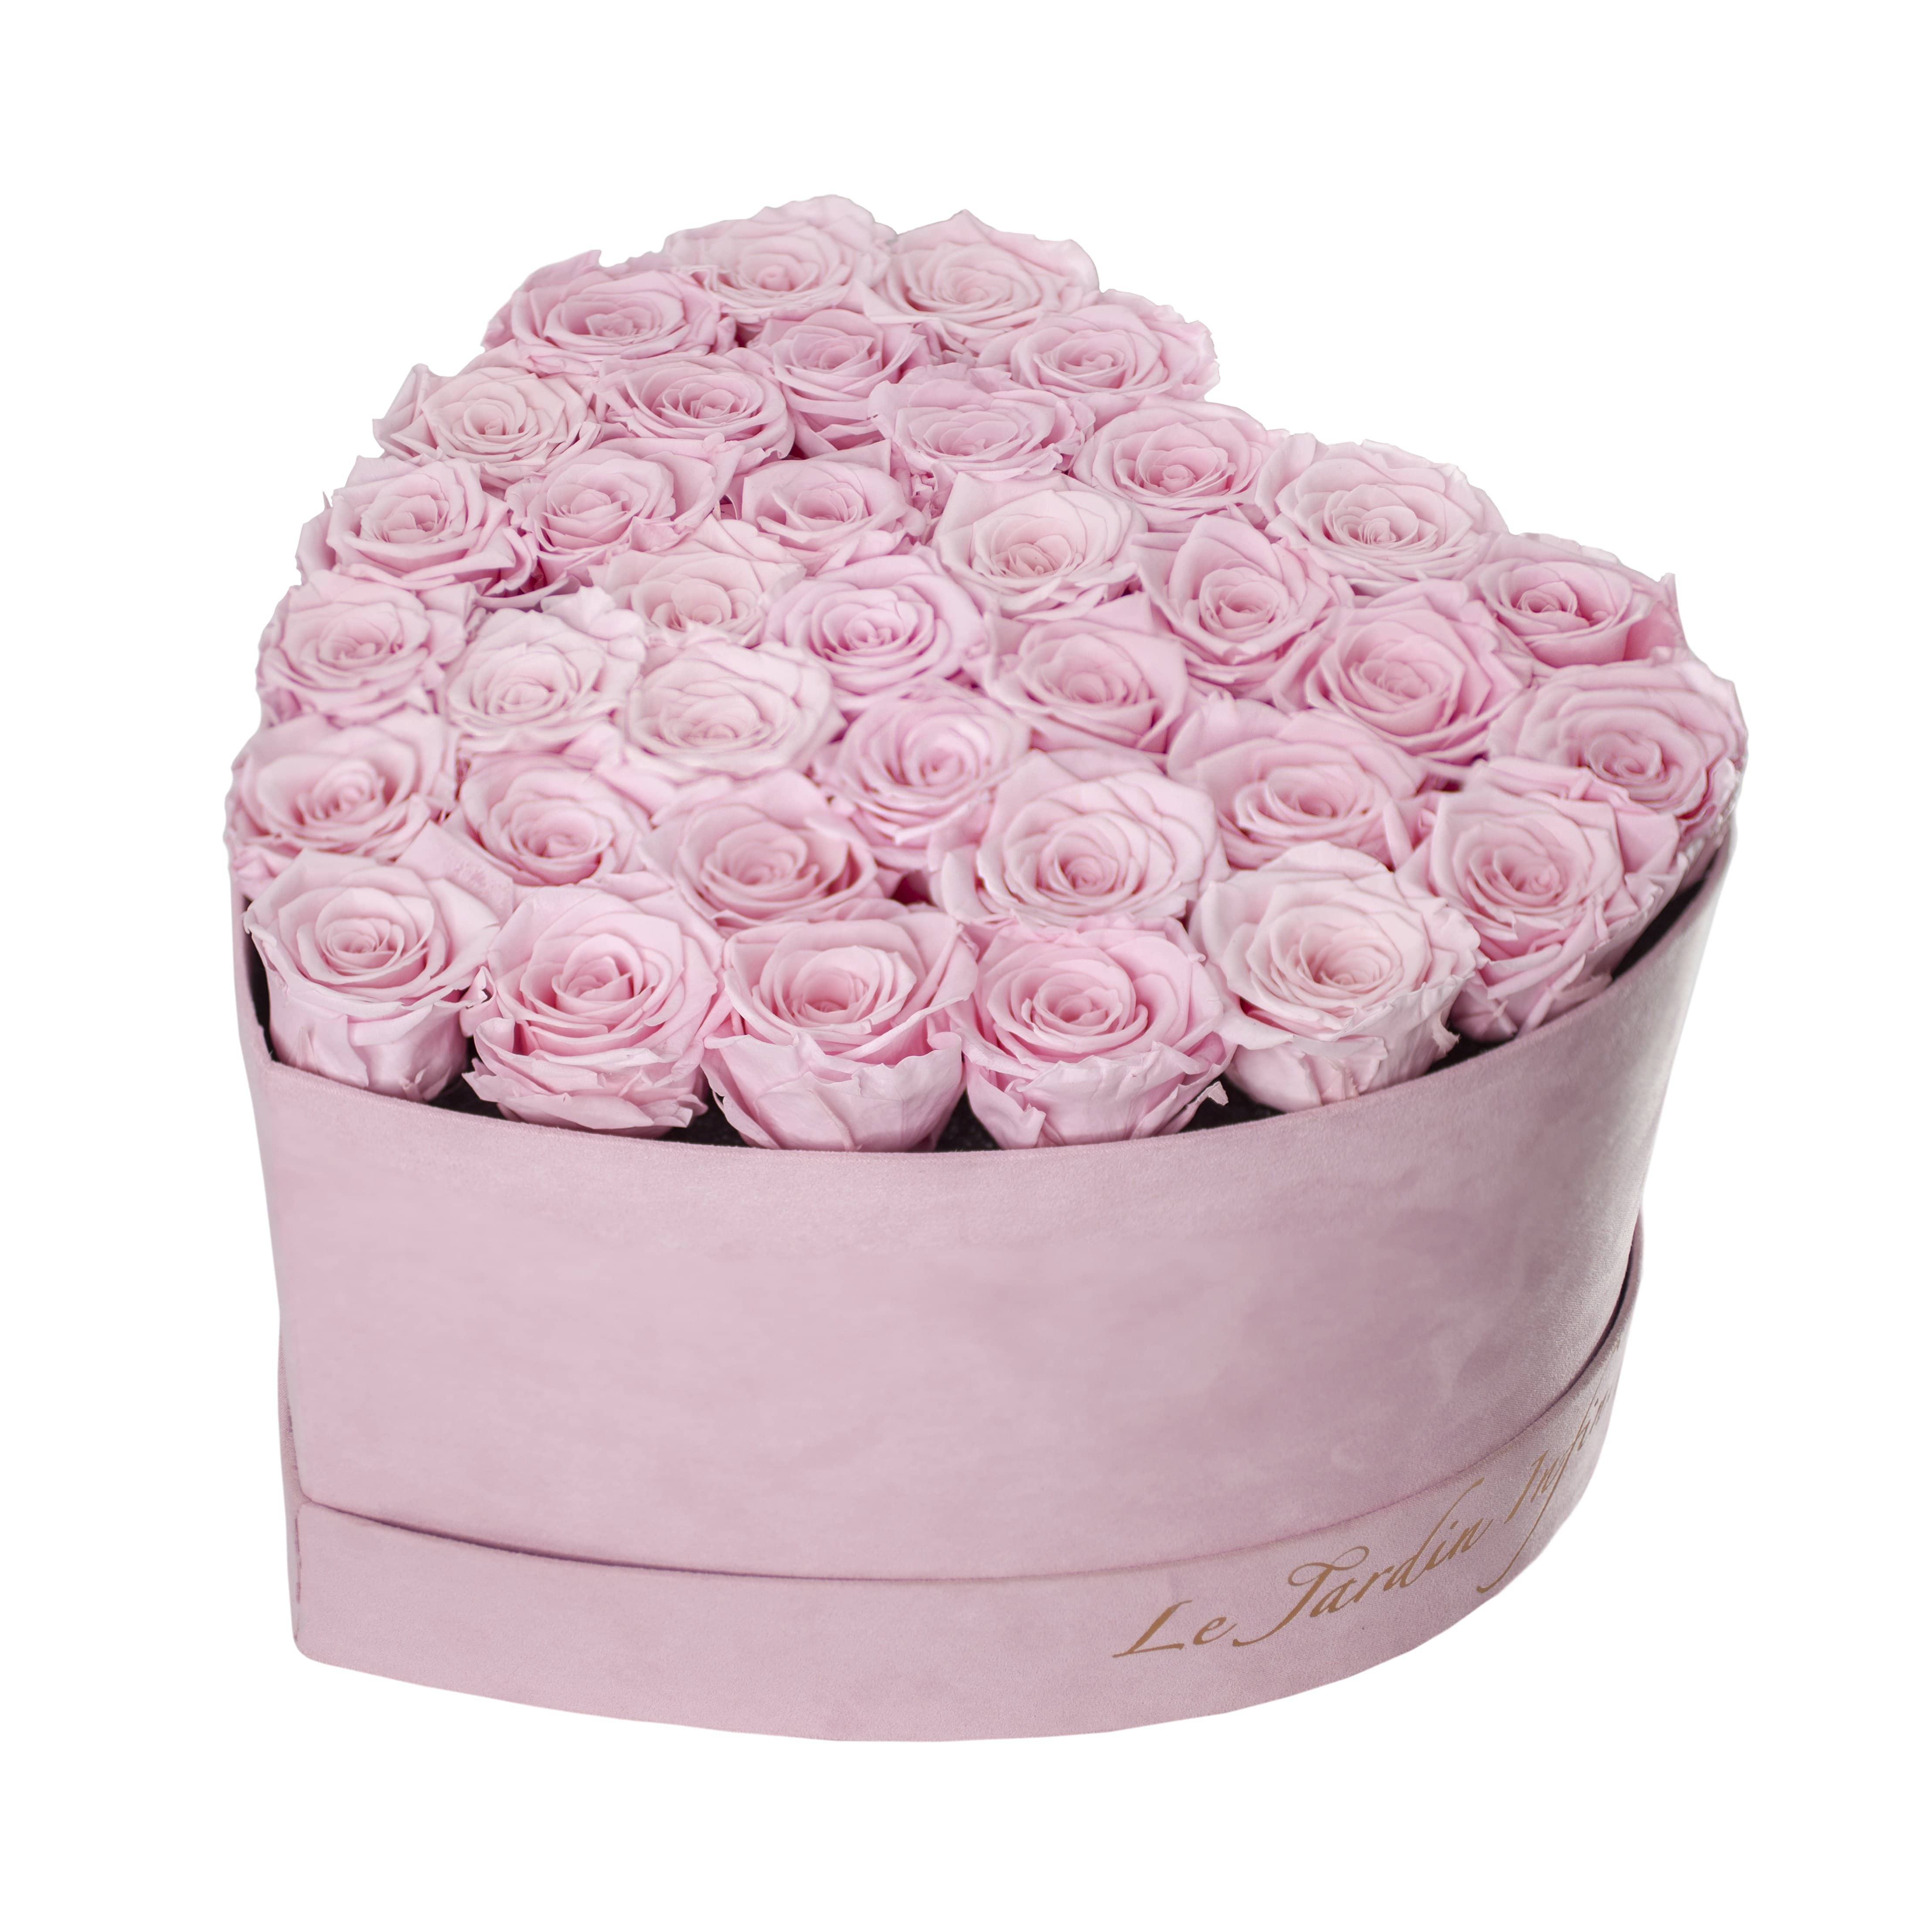 36 Soft Pink Preserved Roses in A Heart Shaped Box - Small Heart Luxury  Pink Suede Box